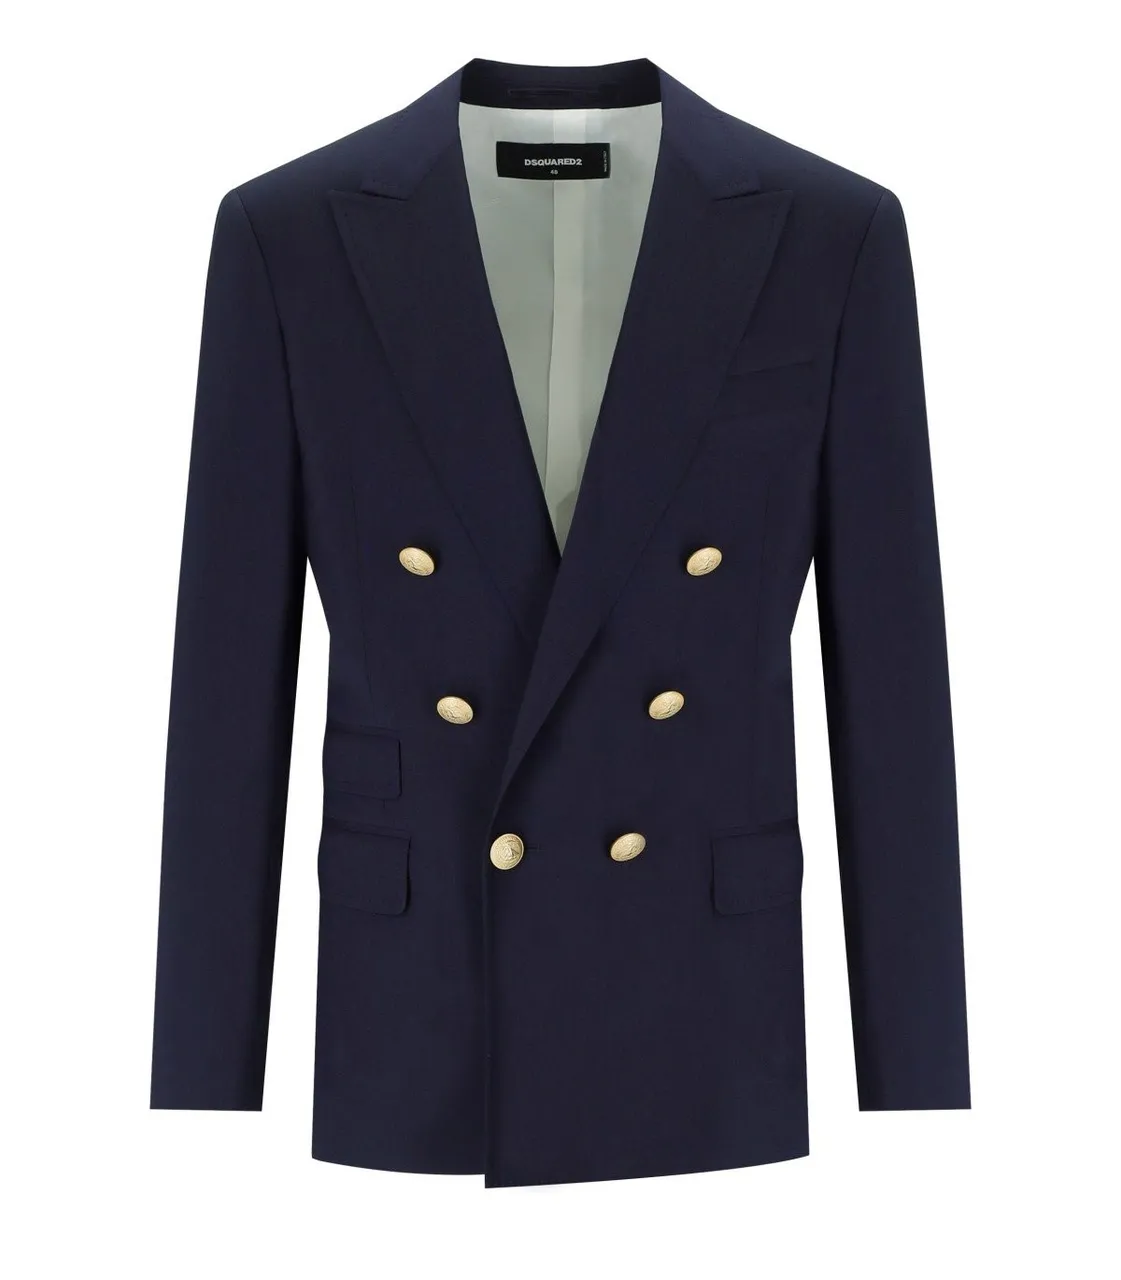 DSQUARED2 PALM BEACH BLUE DOUBLE BREASTED JACKET